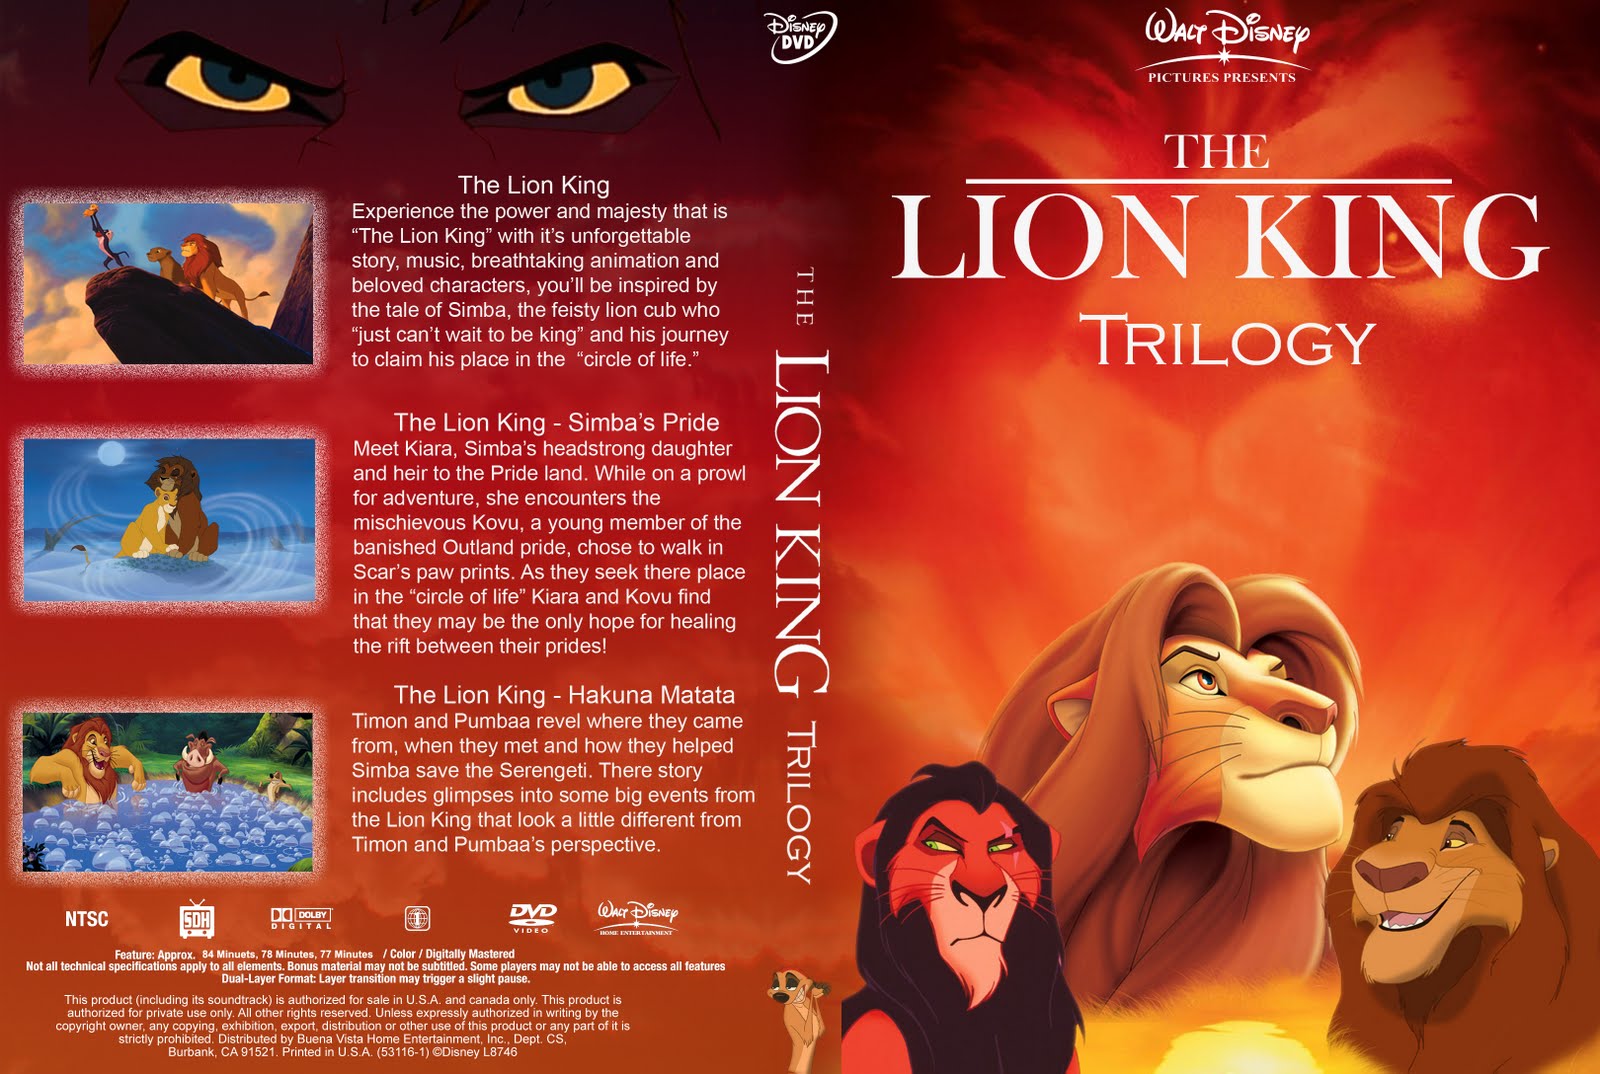 DVD COVERS AND LABELS: The Lion King Trilogy dvd cover